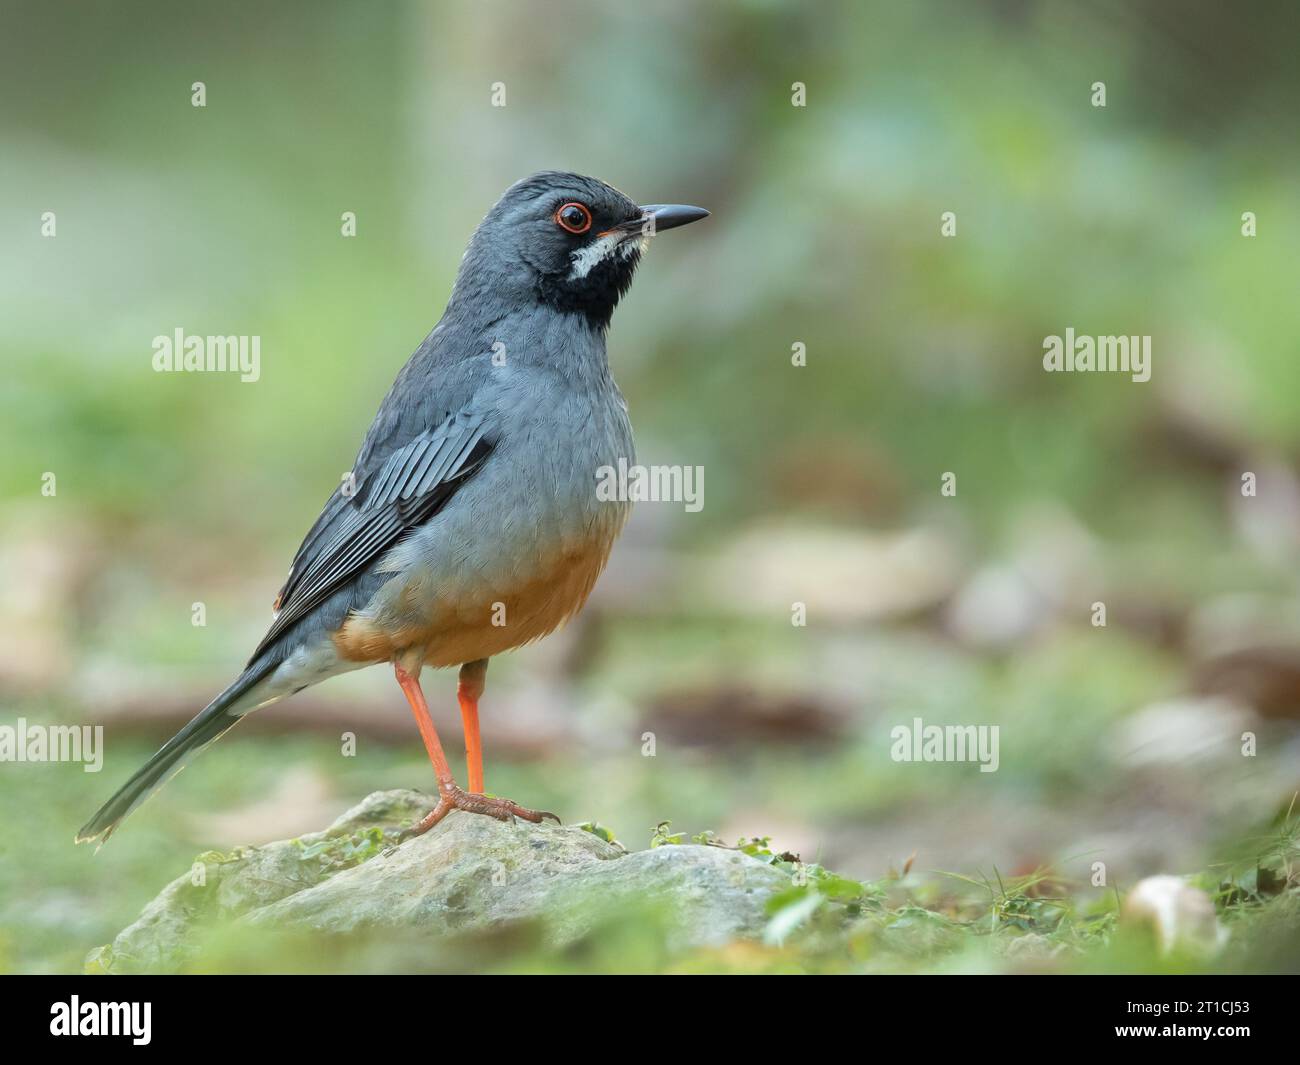 The red-legged thrush (Turdus plumbeus) is a species of bird in the family Turdidae. Stock Photo